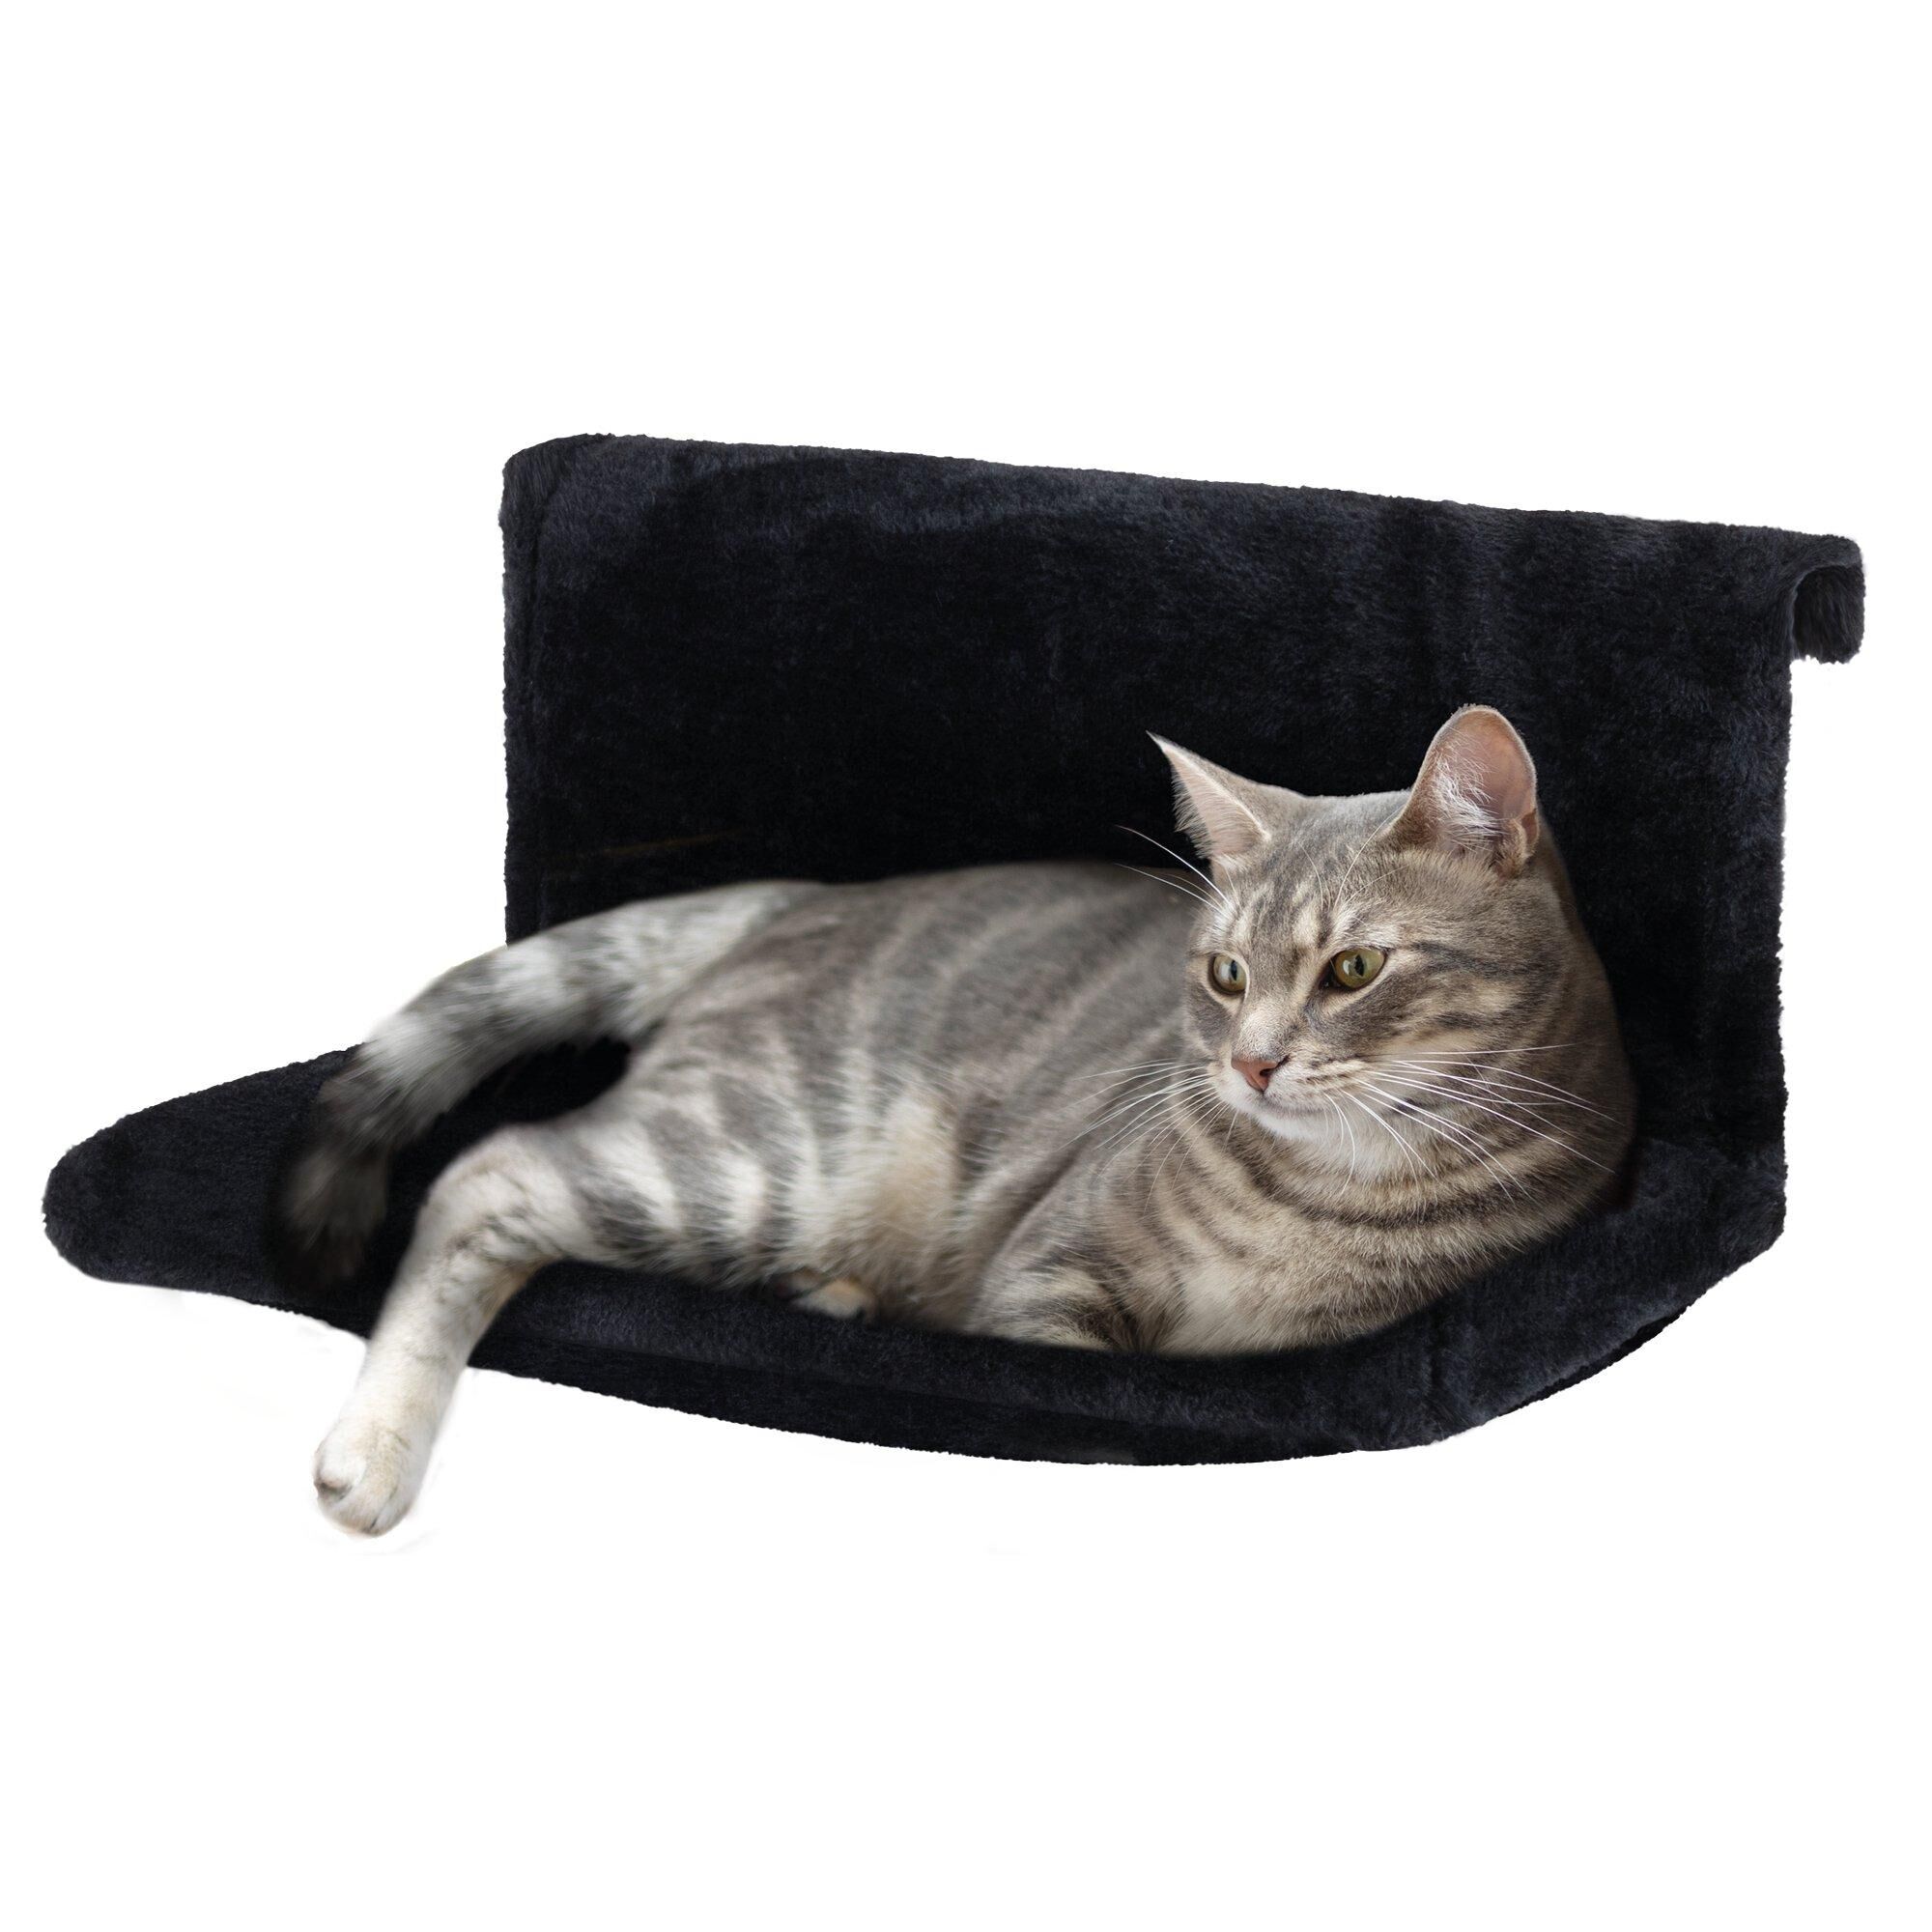 Petlicity Radiator Pet Bed - Perfect for Cats and Dogs!